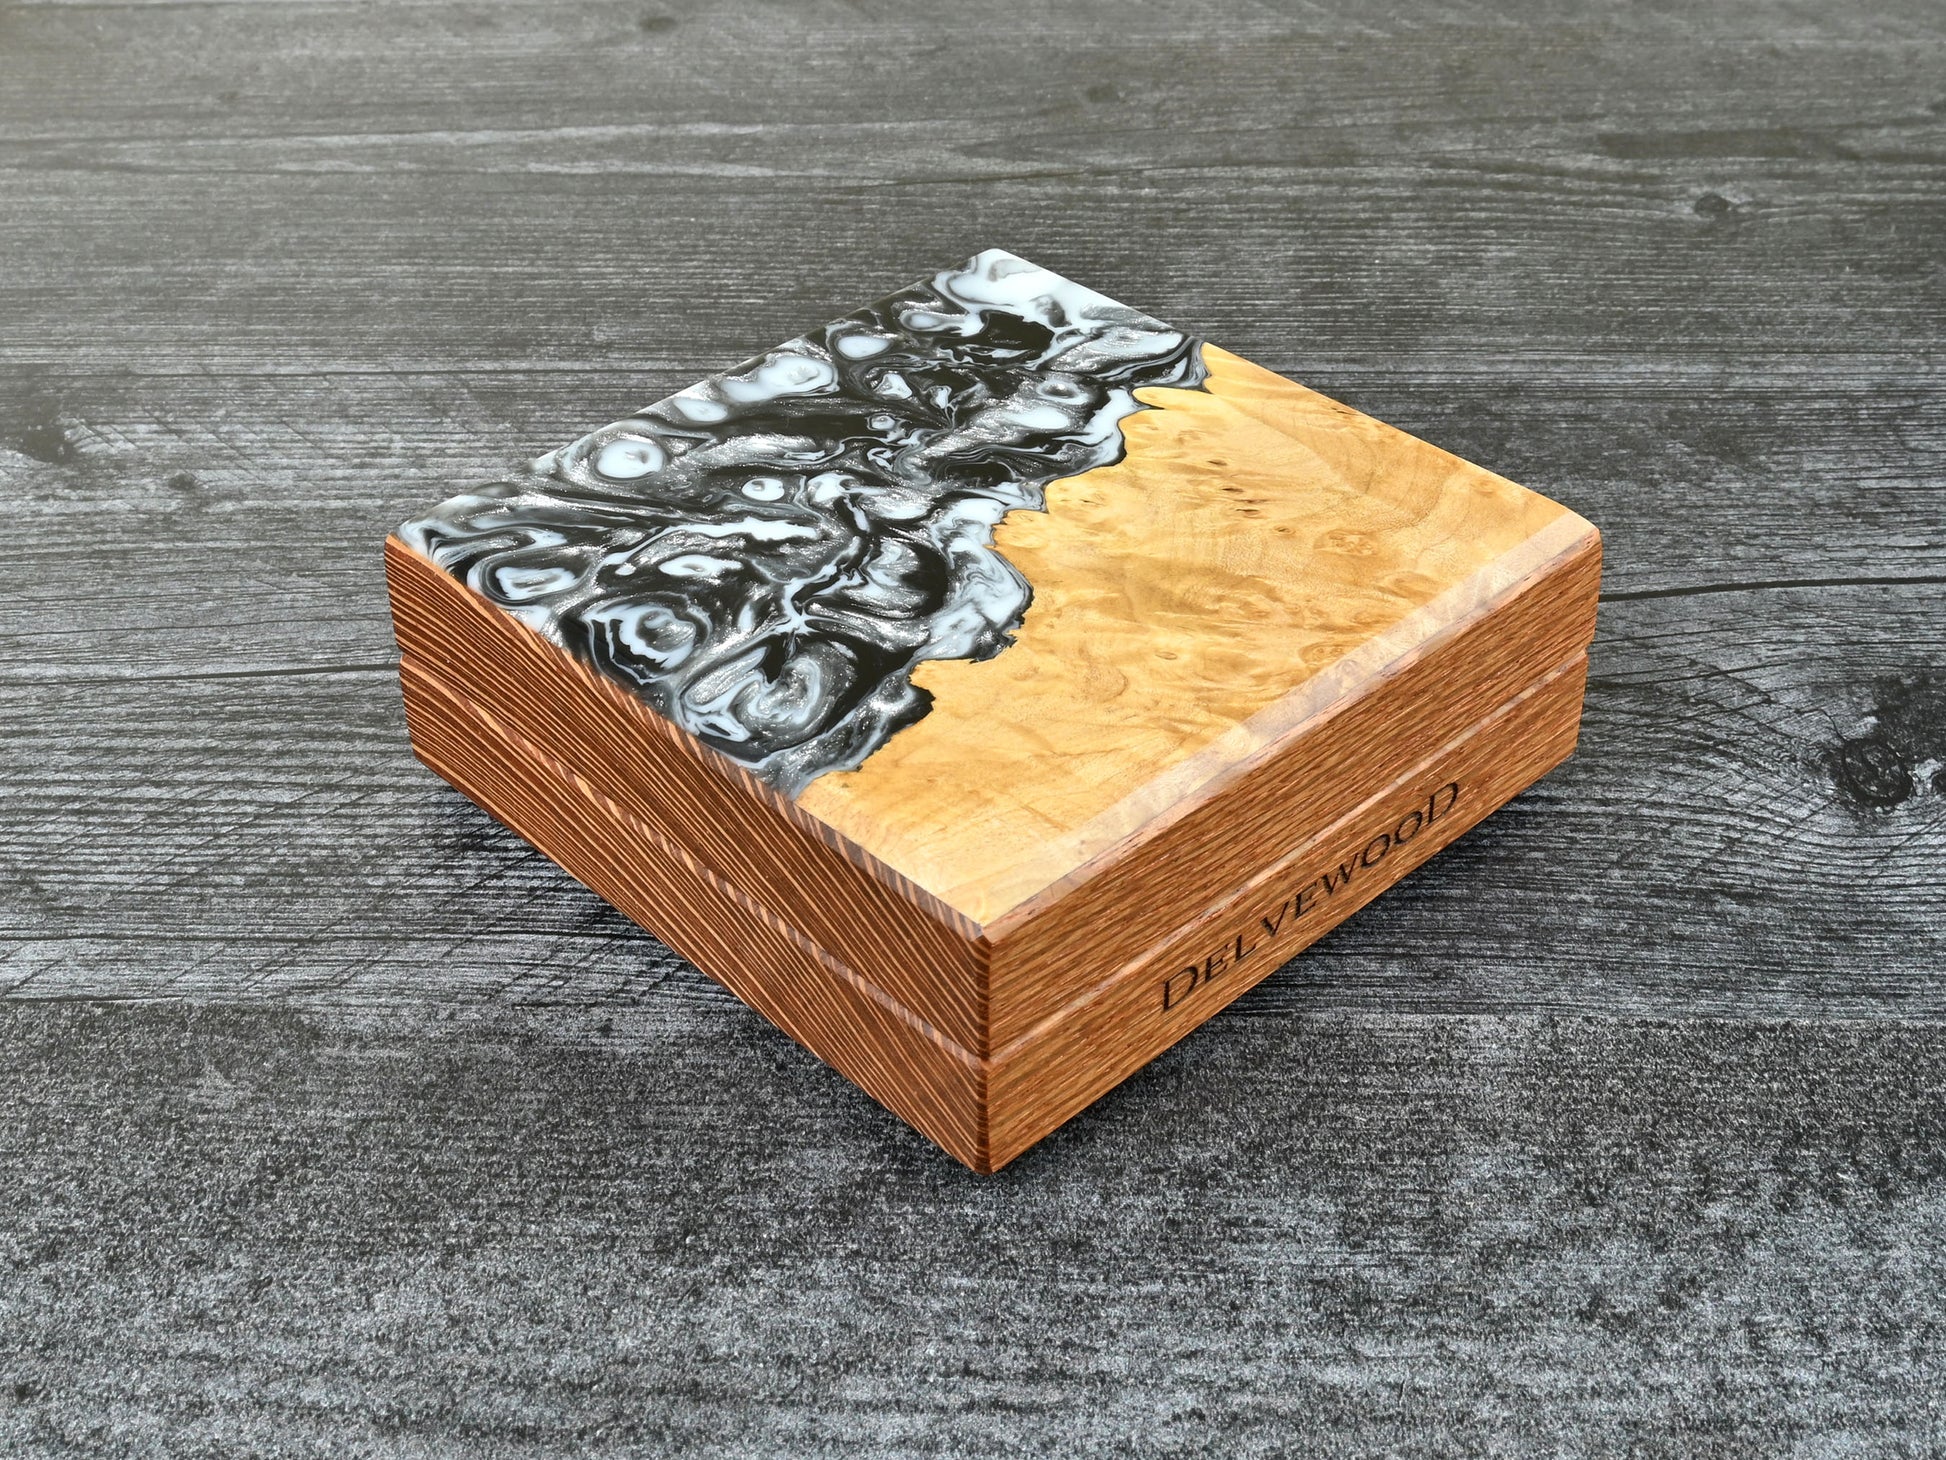 This Little Delver Dice Box features a lacewood core and a maple burl top veneer with black, white, and silver resin. D&D ttrpg.